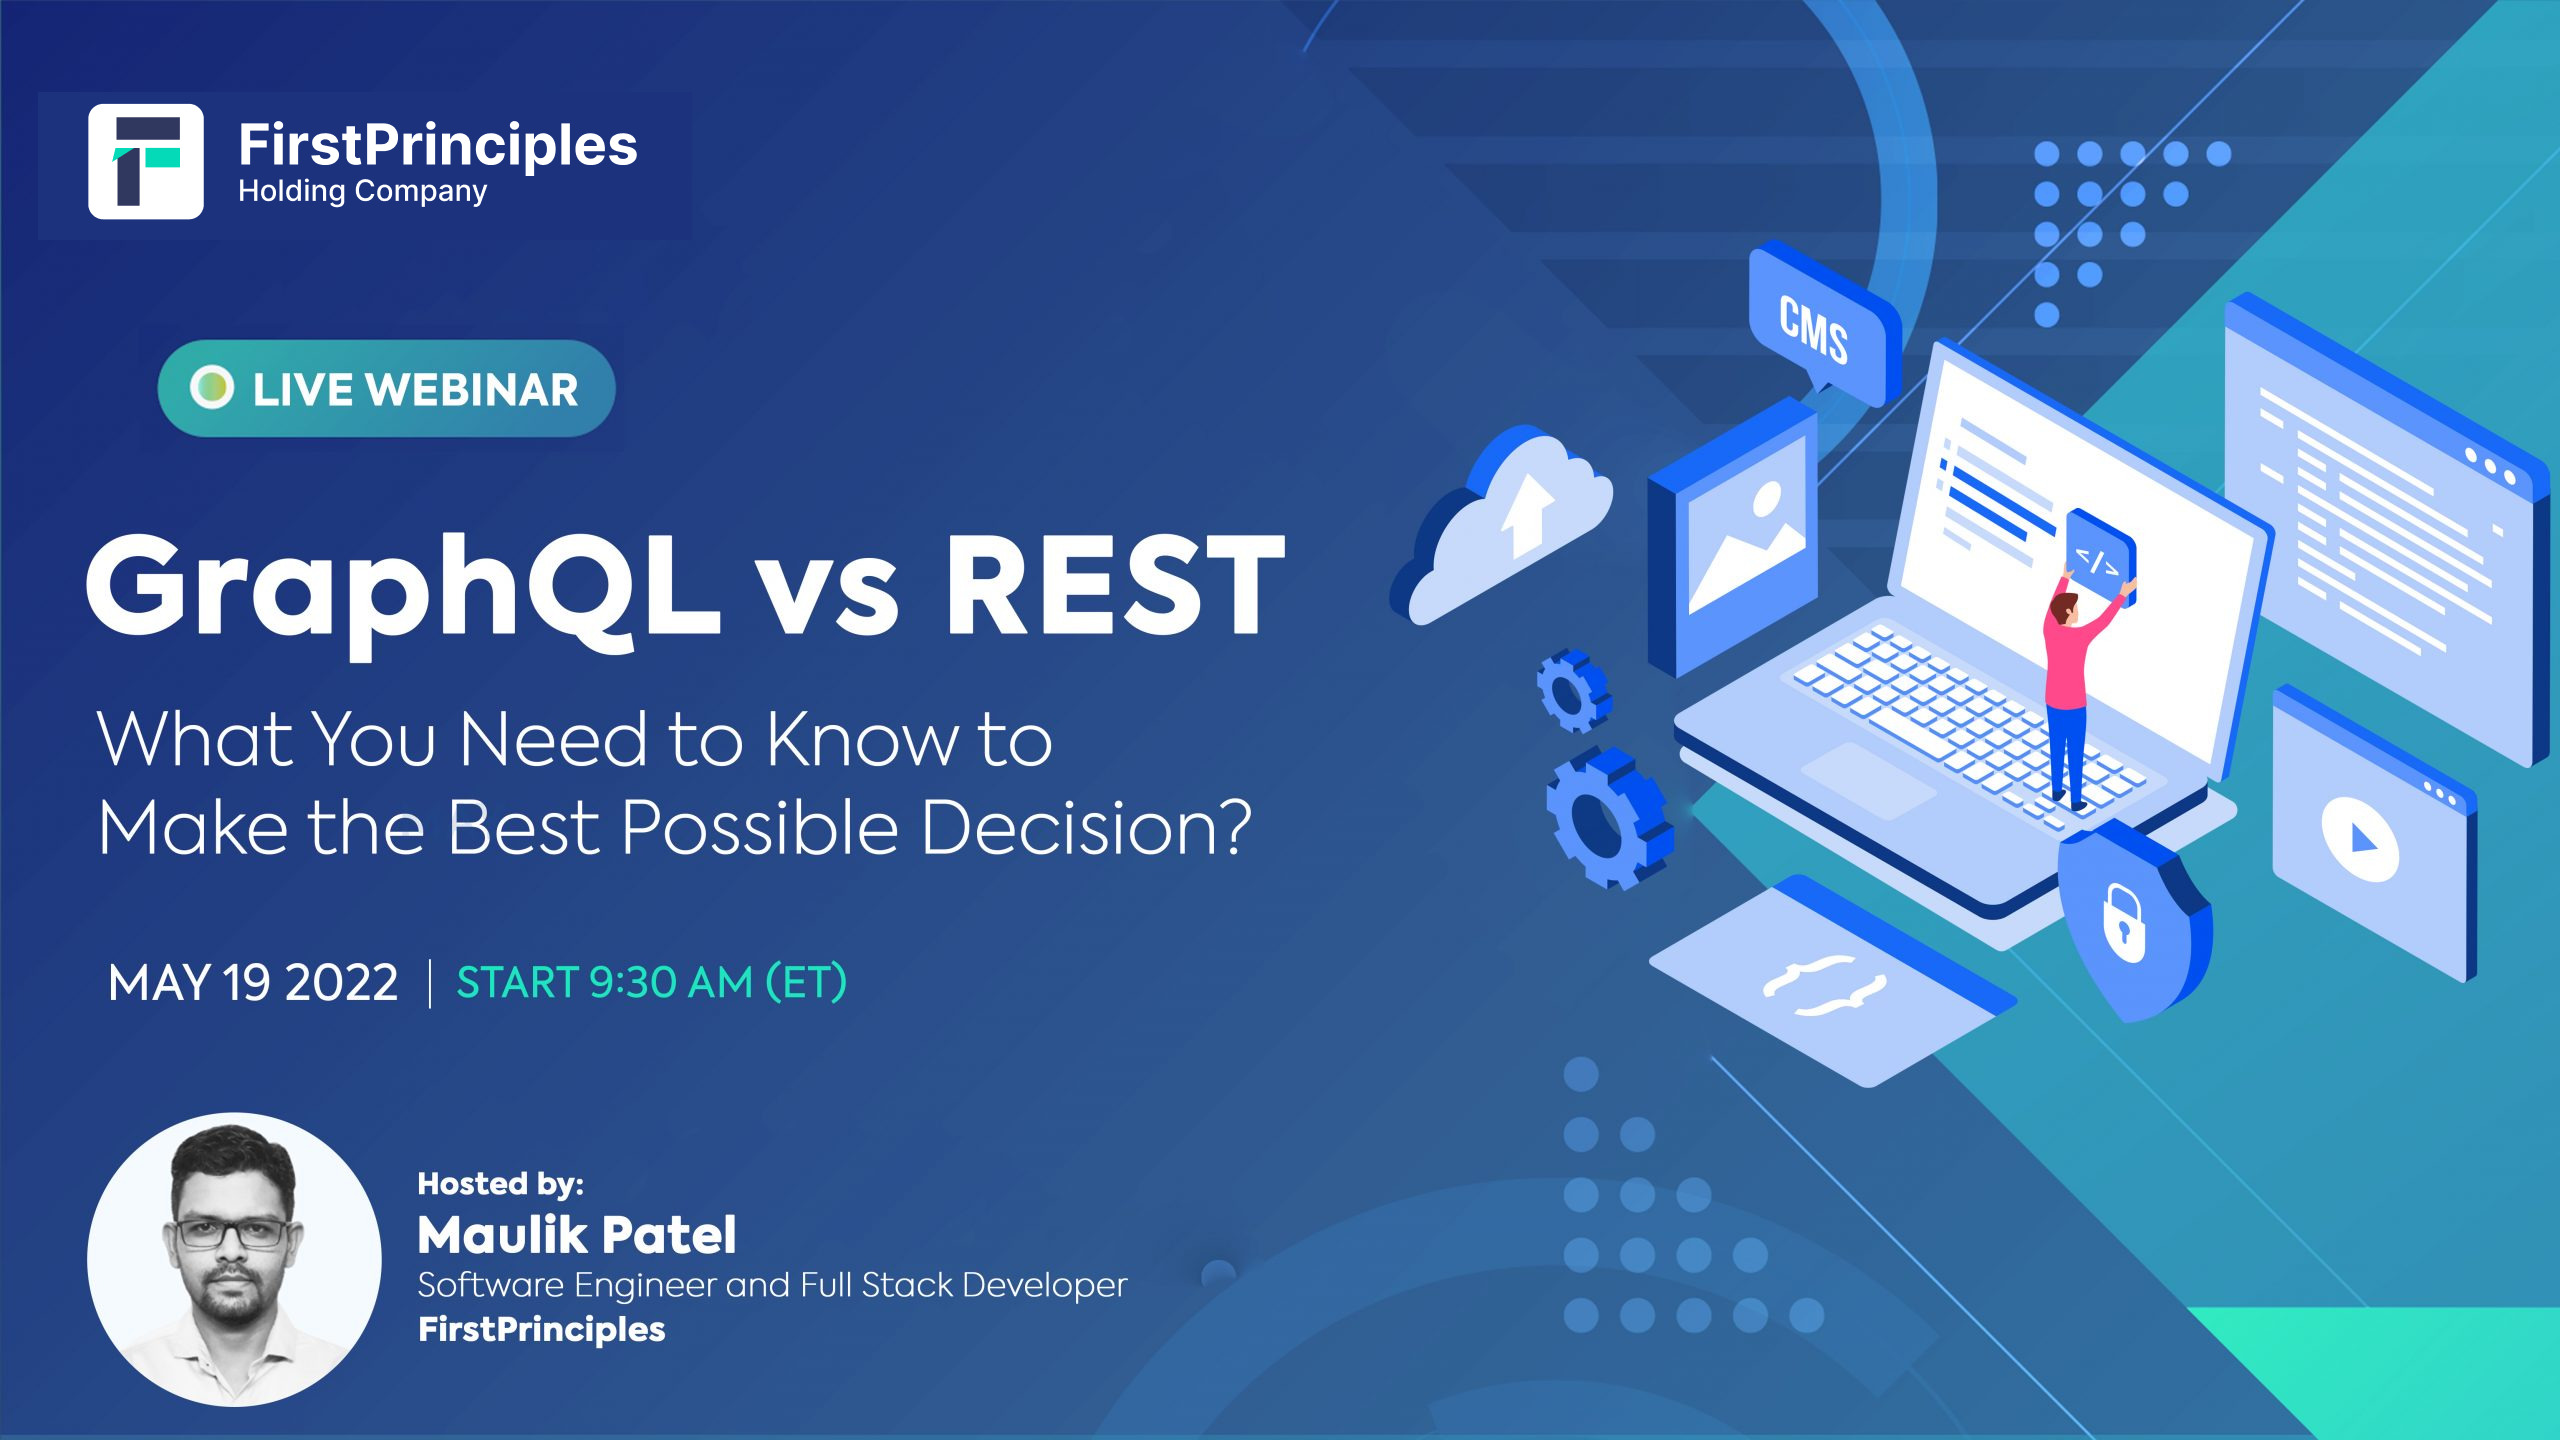 GraphQL vs REST: What You Need to Know to Make the Best Possible Decision?